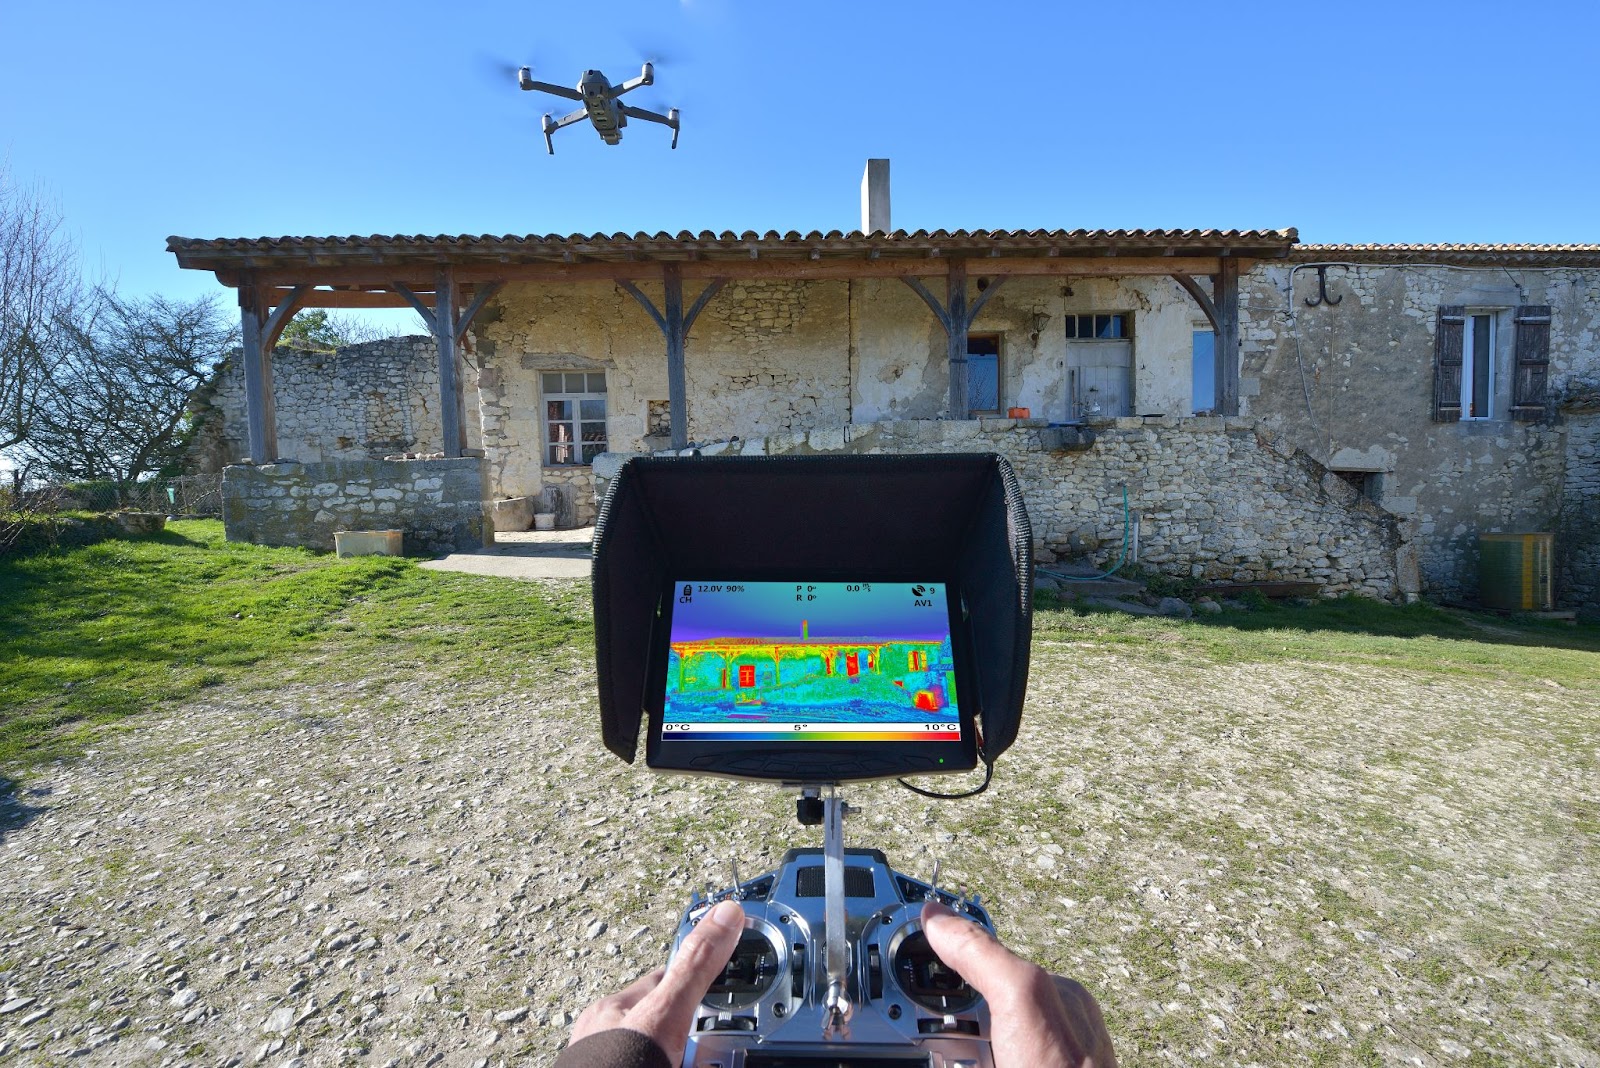 Thermographic scanning using a drone